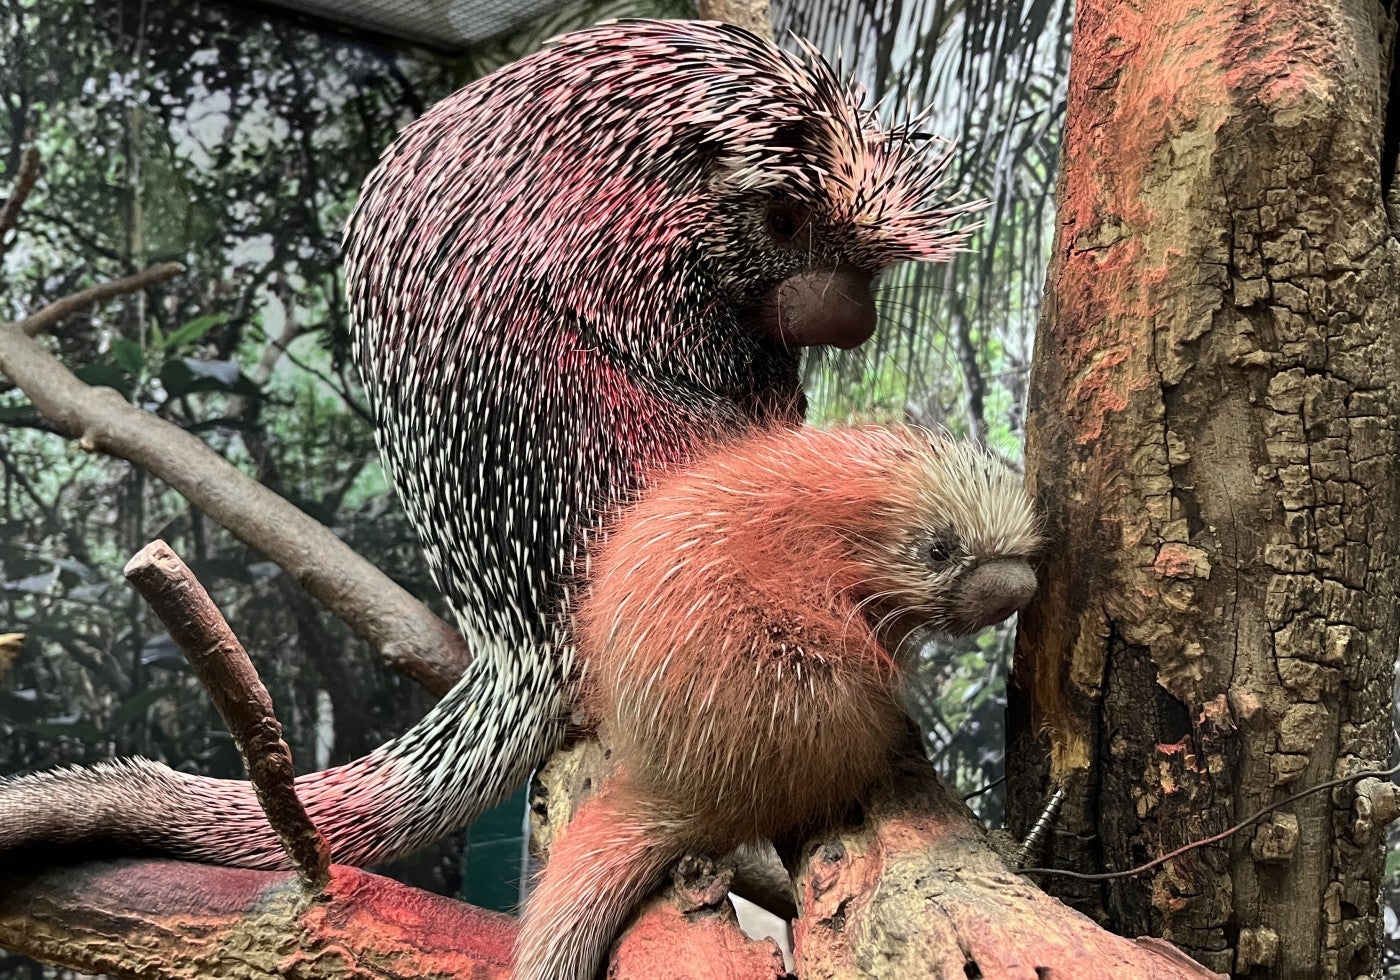 Prehensile-tailed porcupine Beatrix(left) and Fofo (right)